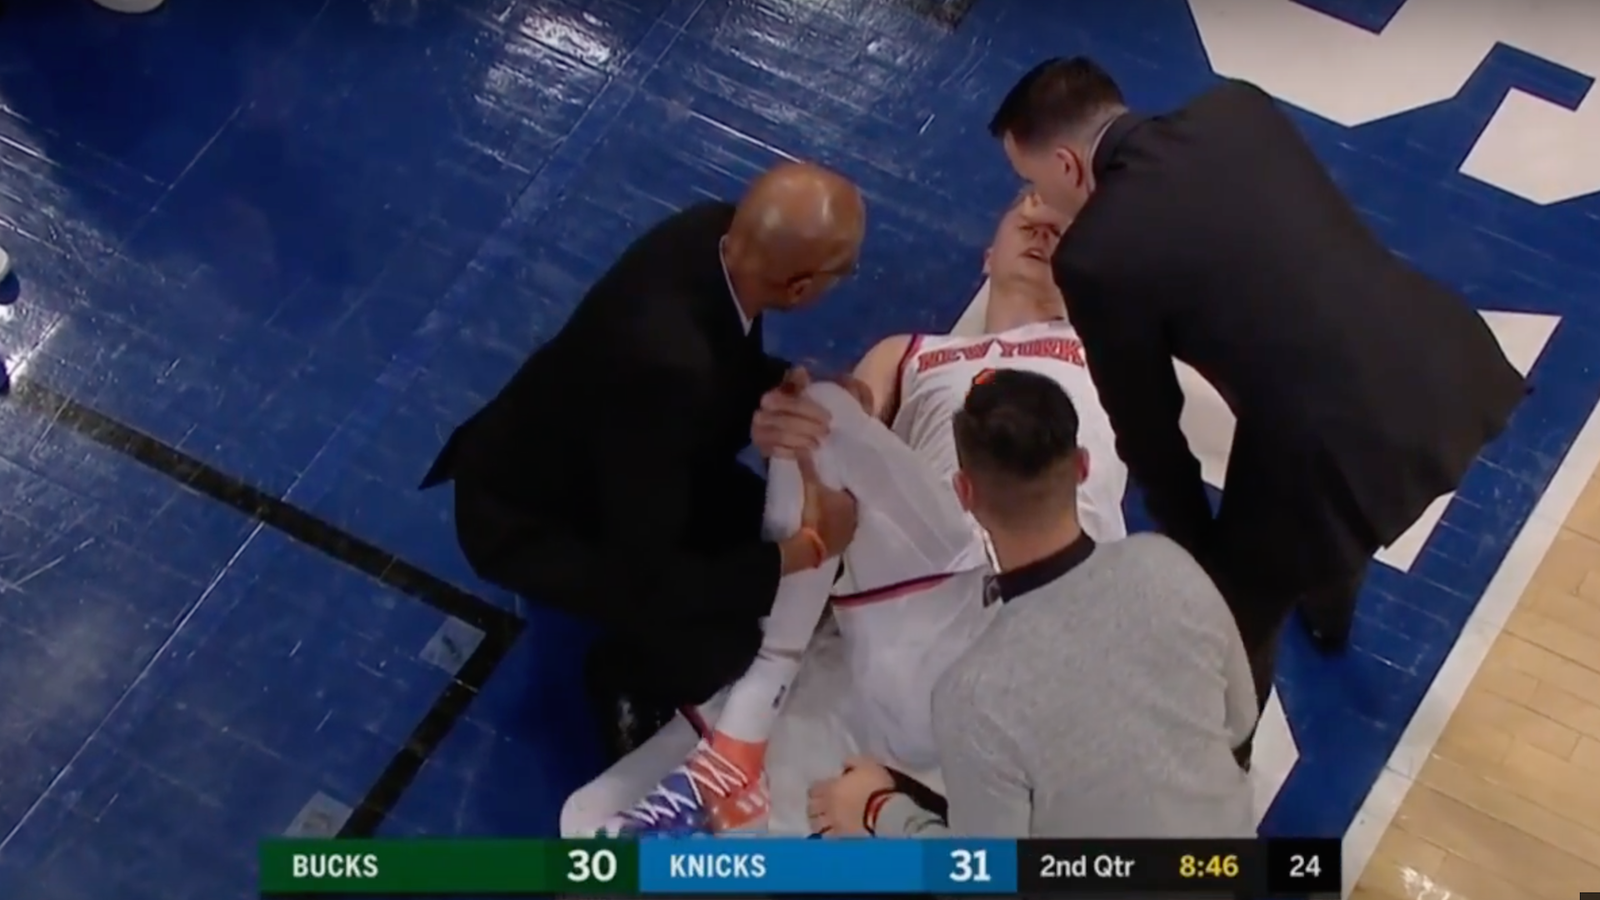 Kristaps Porzingis Helped Off Court After Ugly Knee Injury [UPDATED]